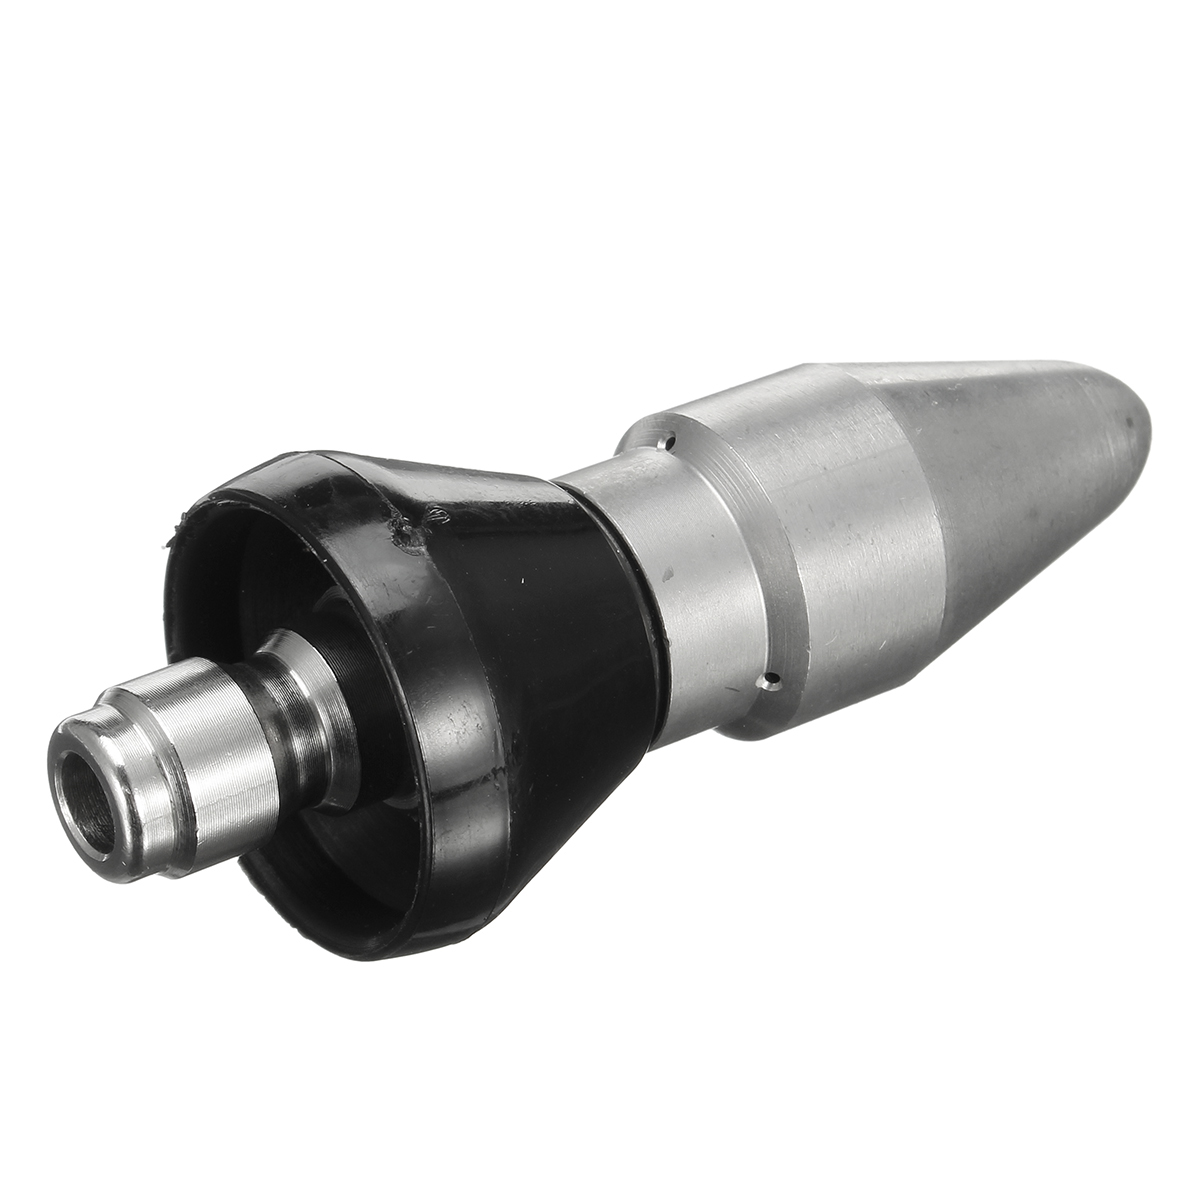 1-Front-6-Rear-Cleaning-Nozzle-14quot-Pressure-Washer-Drain-Stainless-Steel-Sewer-1634905-5